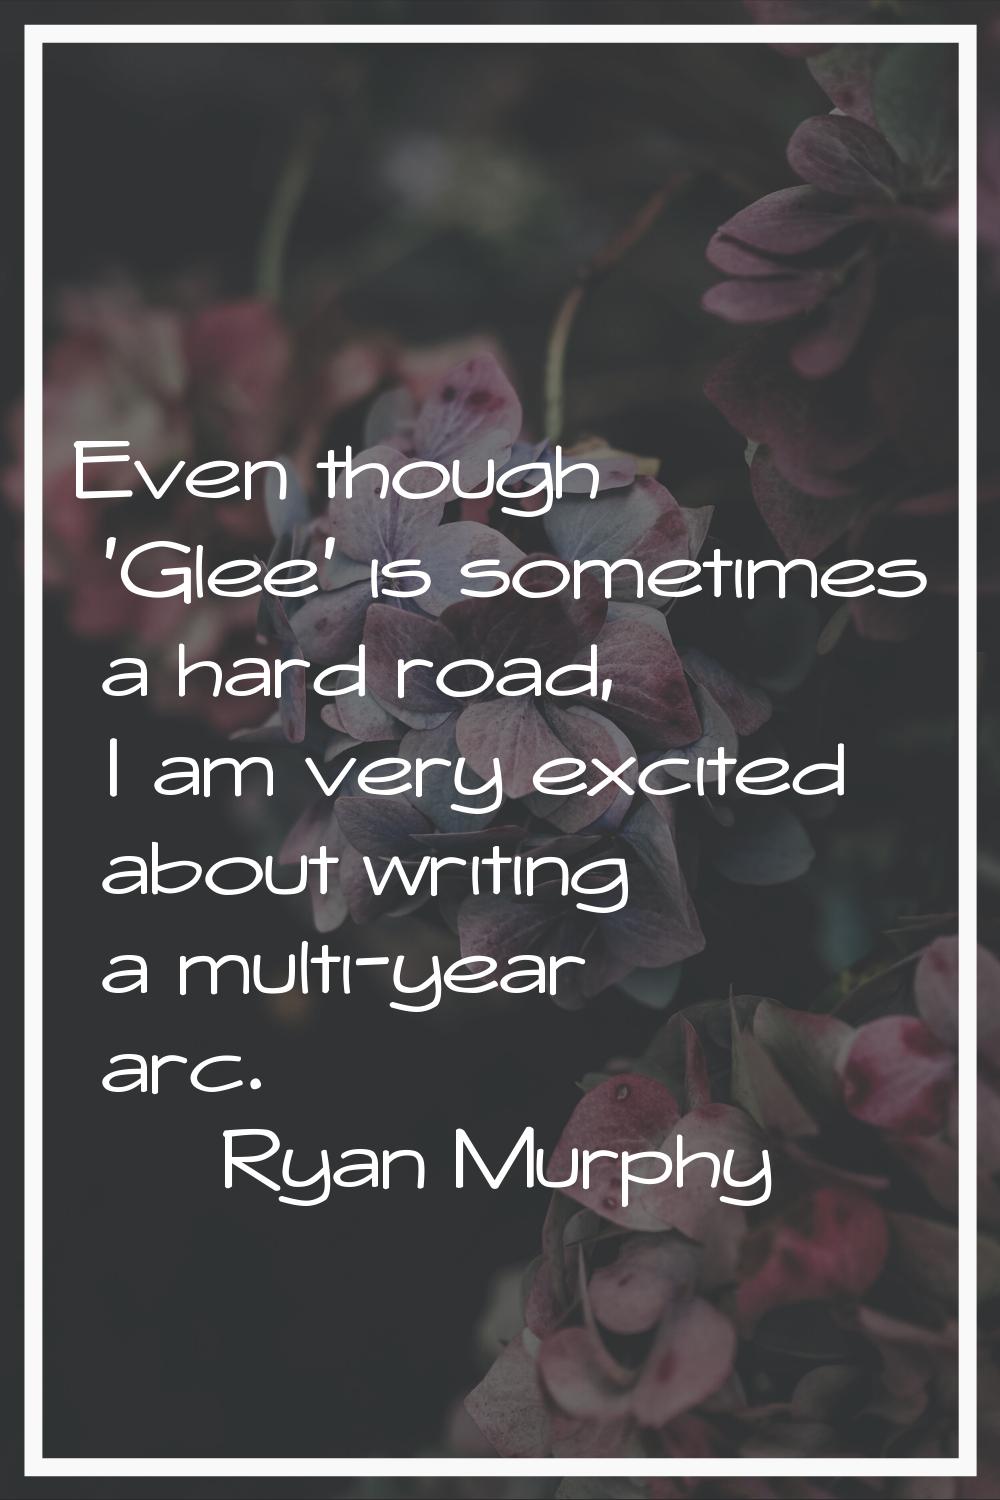 Even though 'Glee' is sometimes a hard road, I am very excited about writing a multi-year arc.